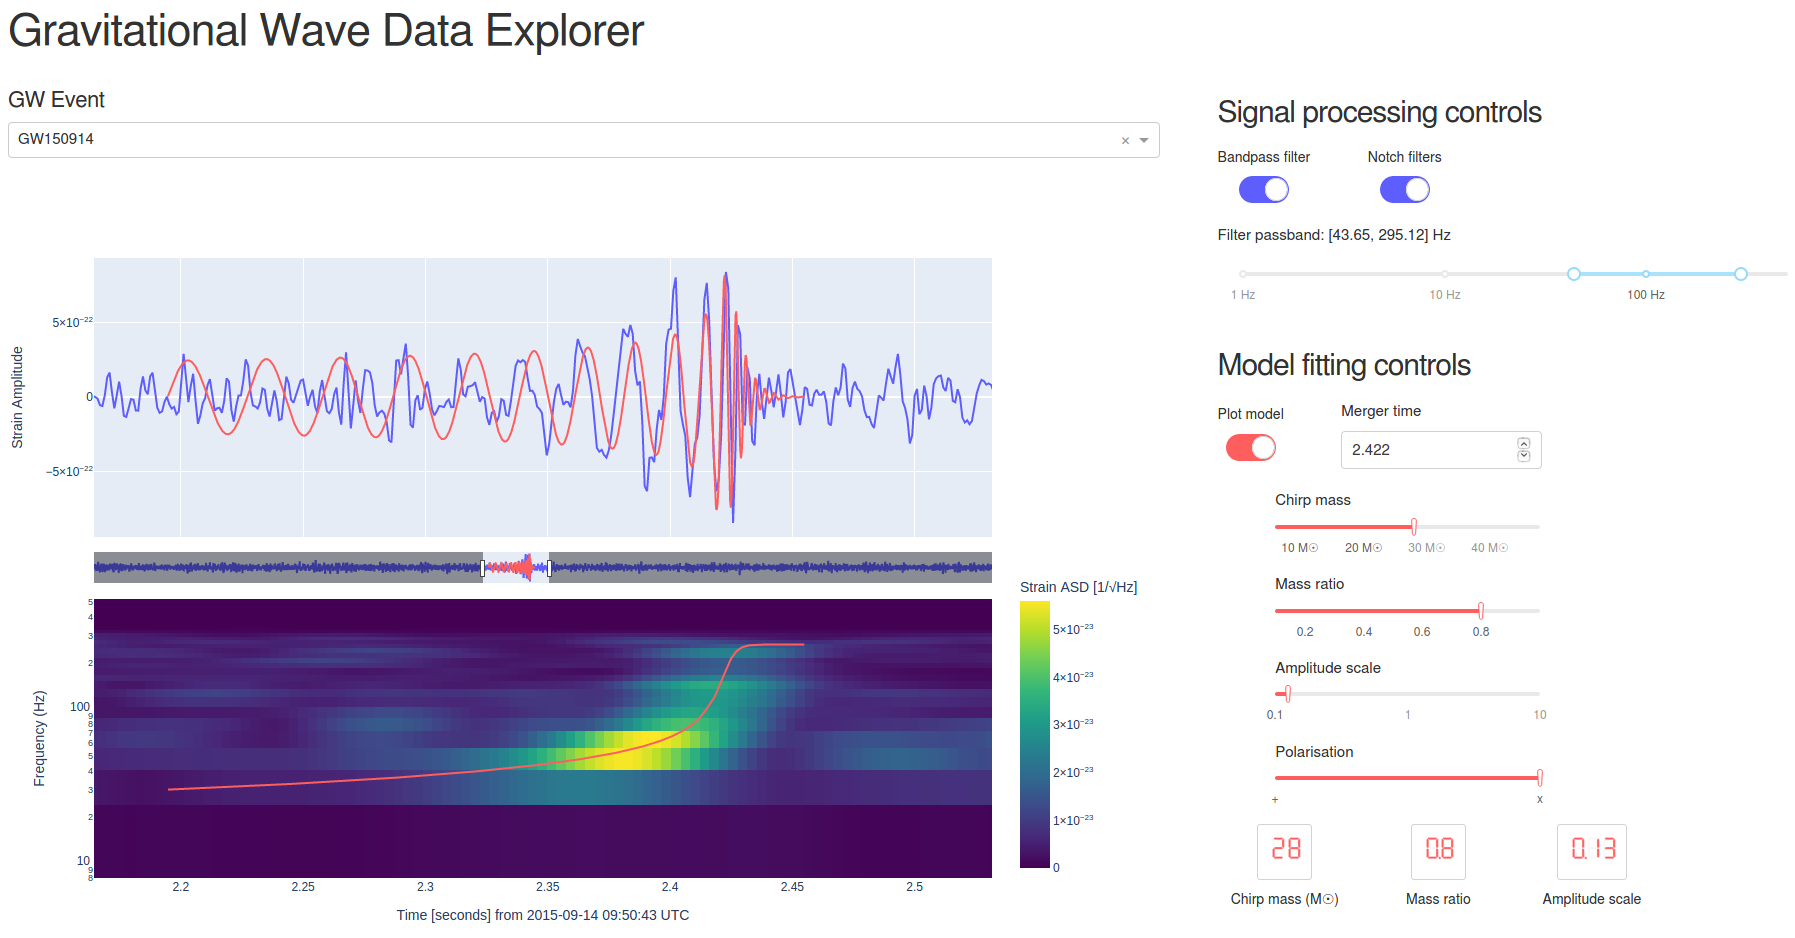 Gravitational Wave Data Explorer dashboard showing a fit to GW150914